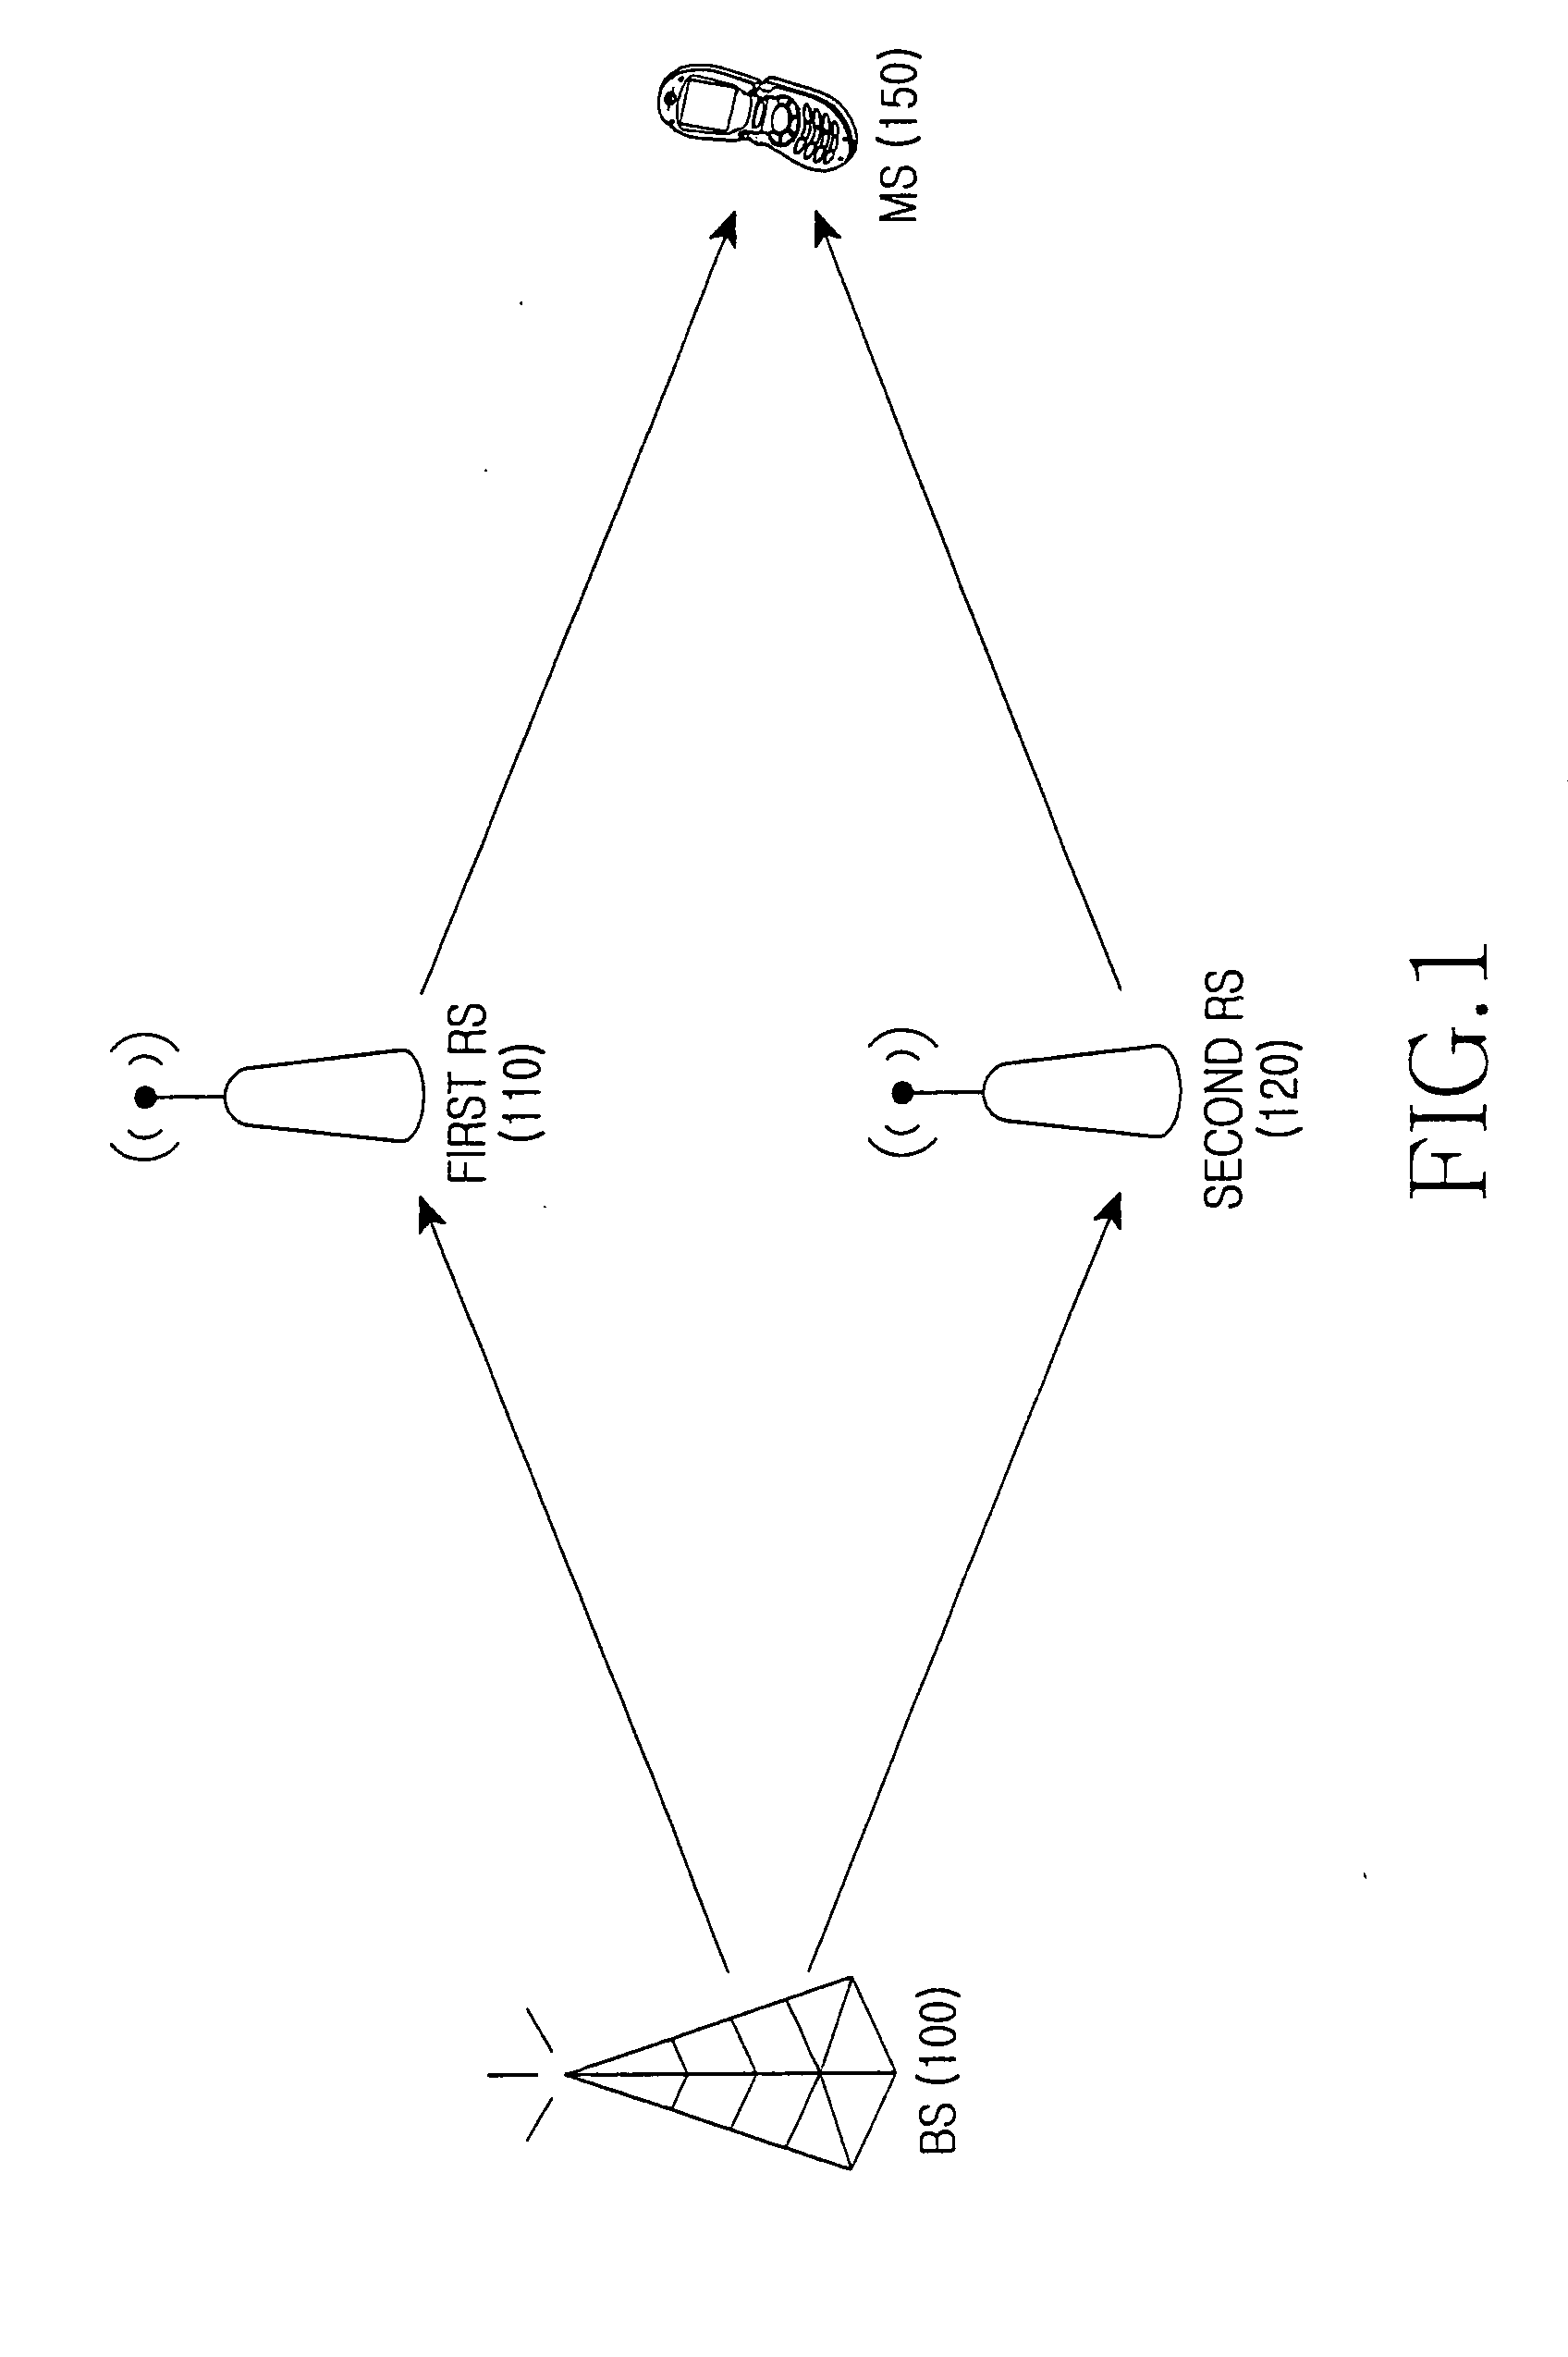 Orthogonal frequency division multiplexing communication system, multi-hop system, relay station, and spatially layered transmission mode